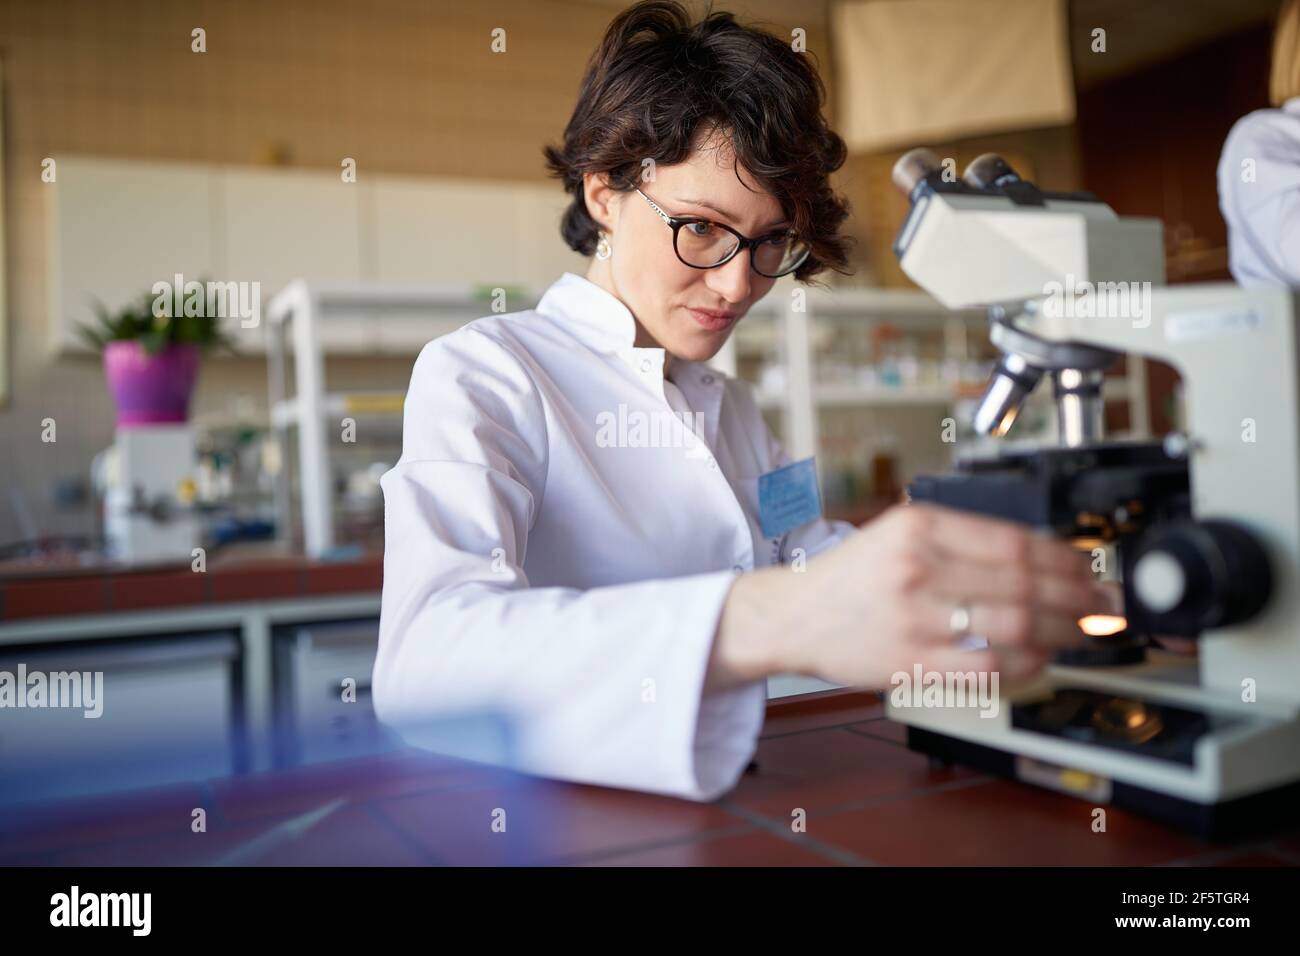 A young female scientist adjusts the microscope in a working atmosphere at the university laboratory. Science, chemistry, lab, people Stock Photo